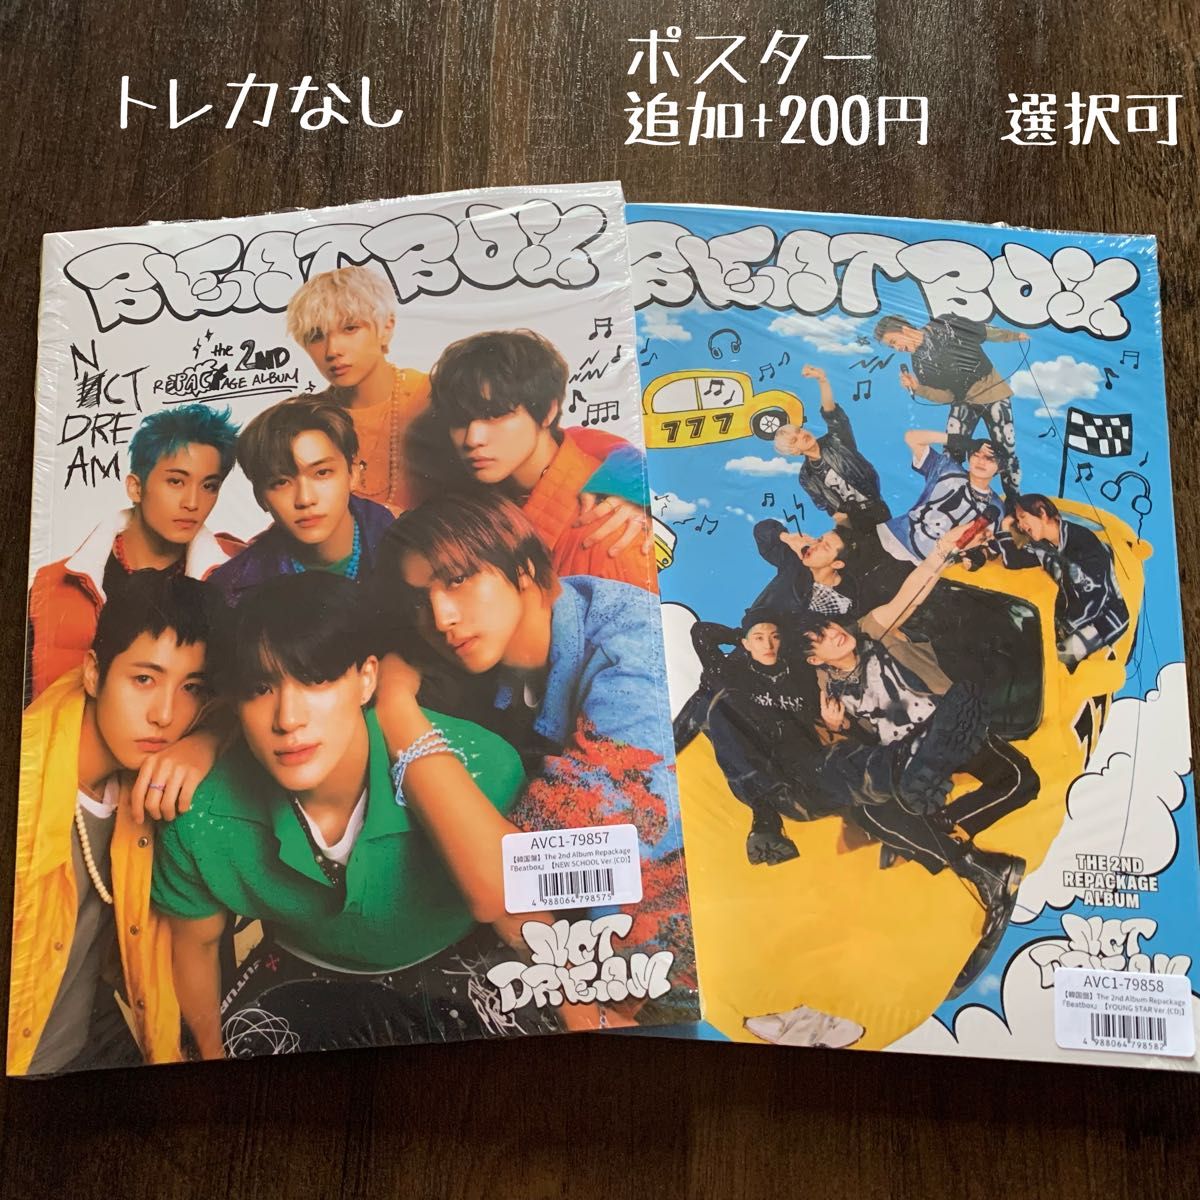 NCT DREAM Beatbox アルバム　開封済み　2冊セット